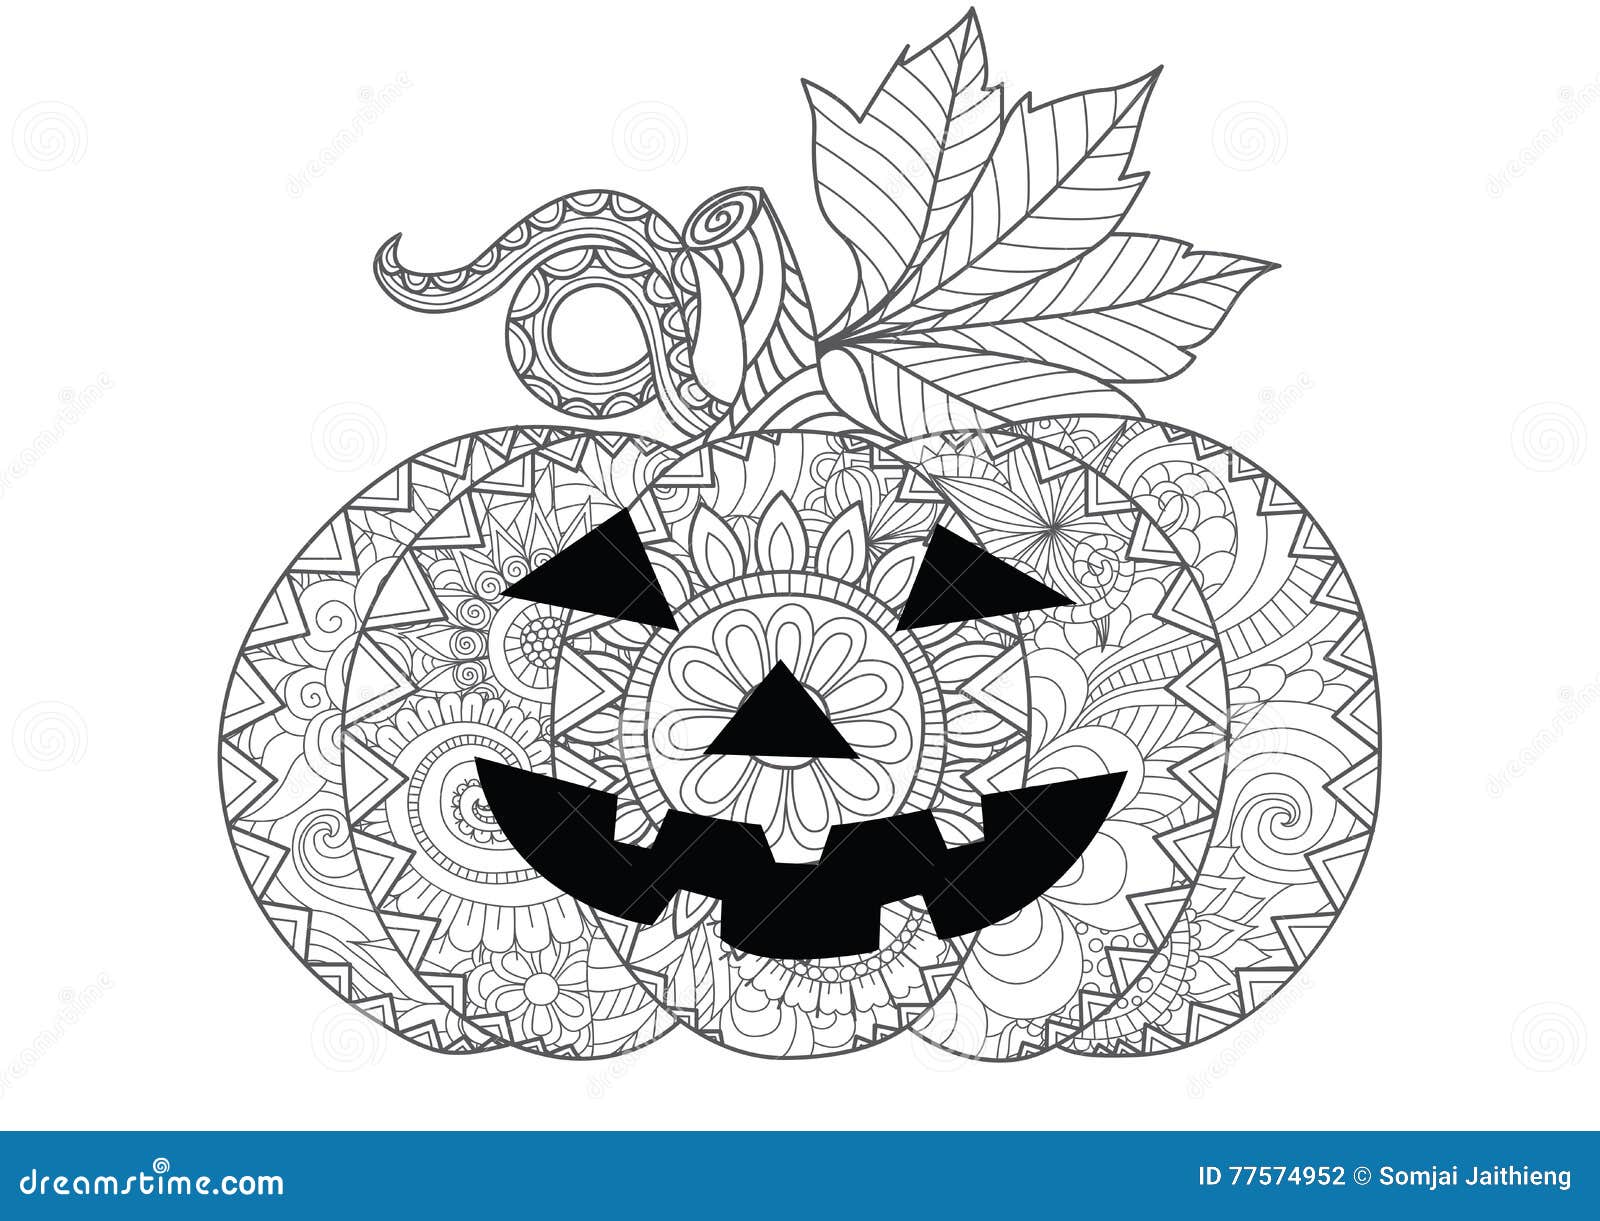 Coloring pages halloween stock illustrations â coloring pages halloween stock illustrations vectors clipart